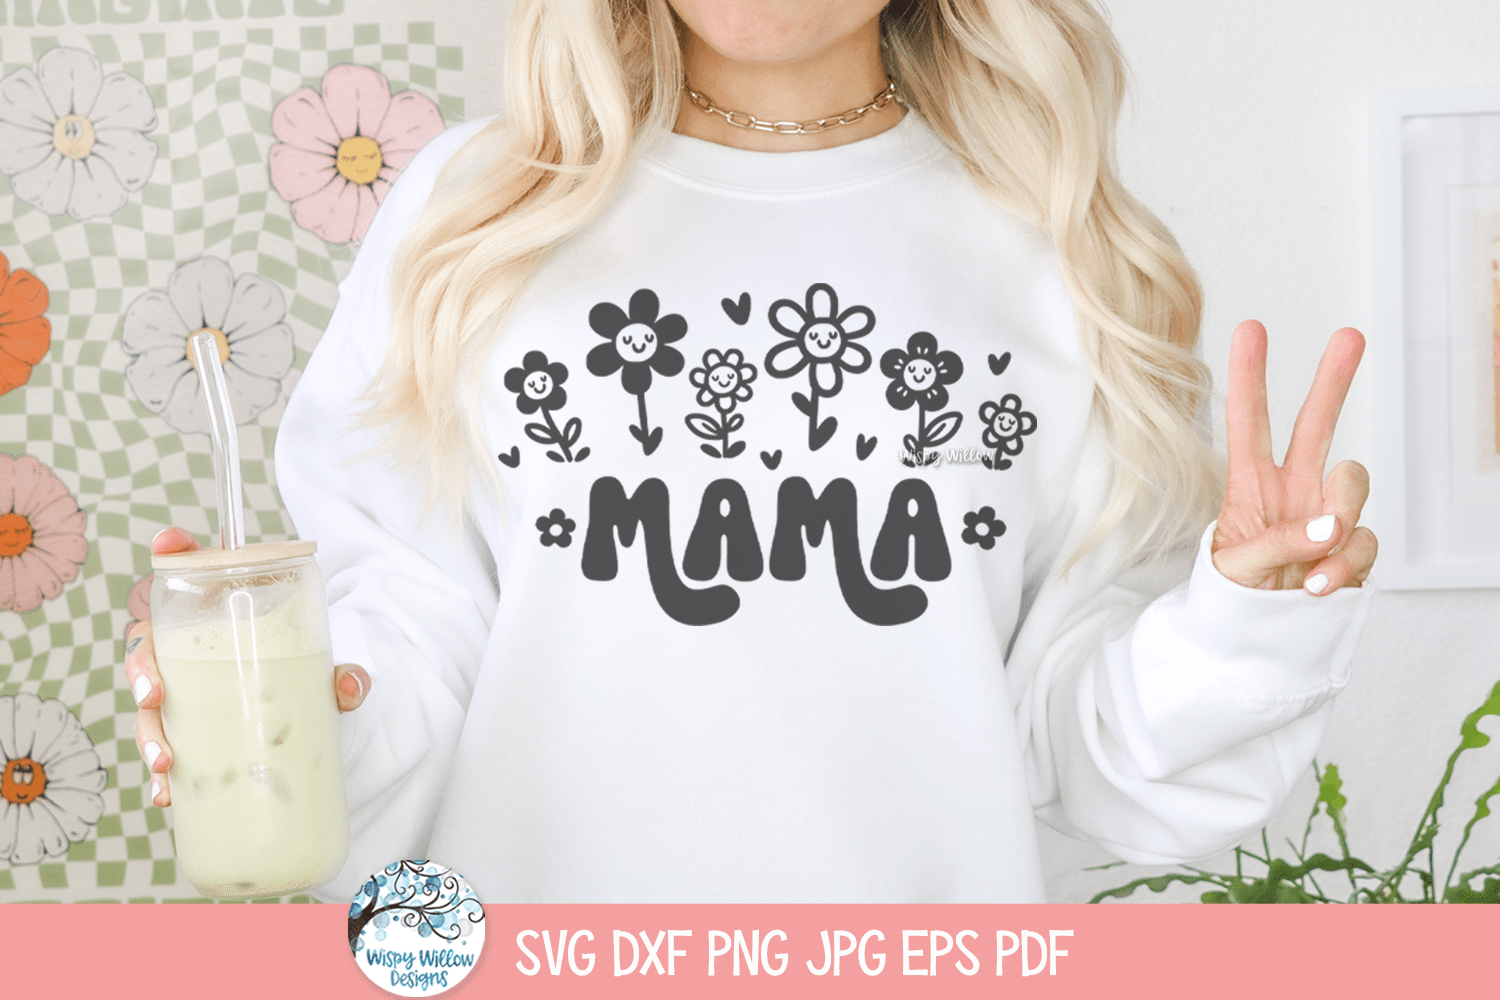 Mama Flowers SVG | Playful Mother's Day T-Shirt Design Wispy Willow Designs Company